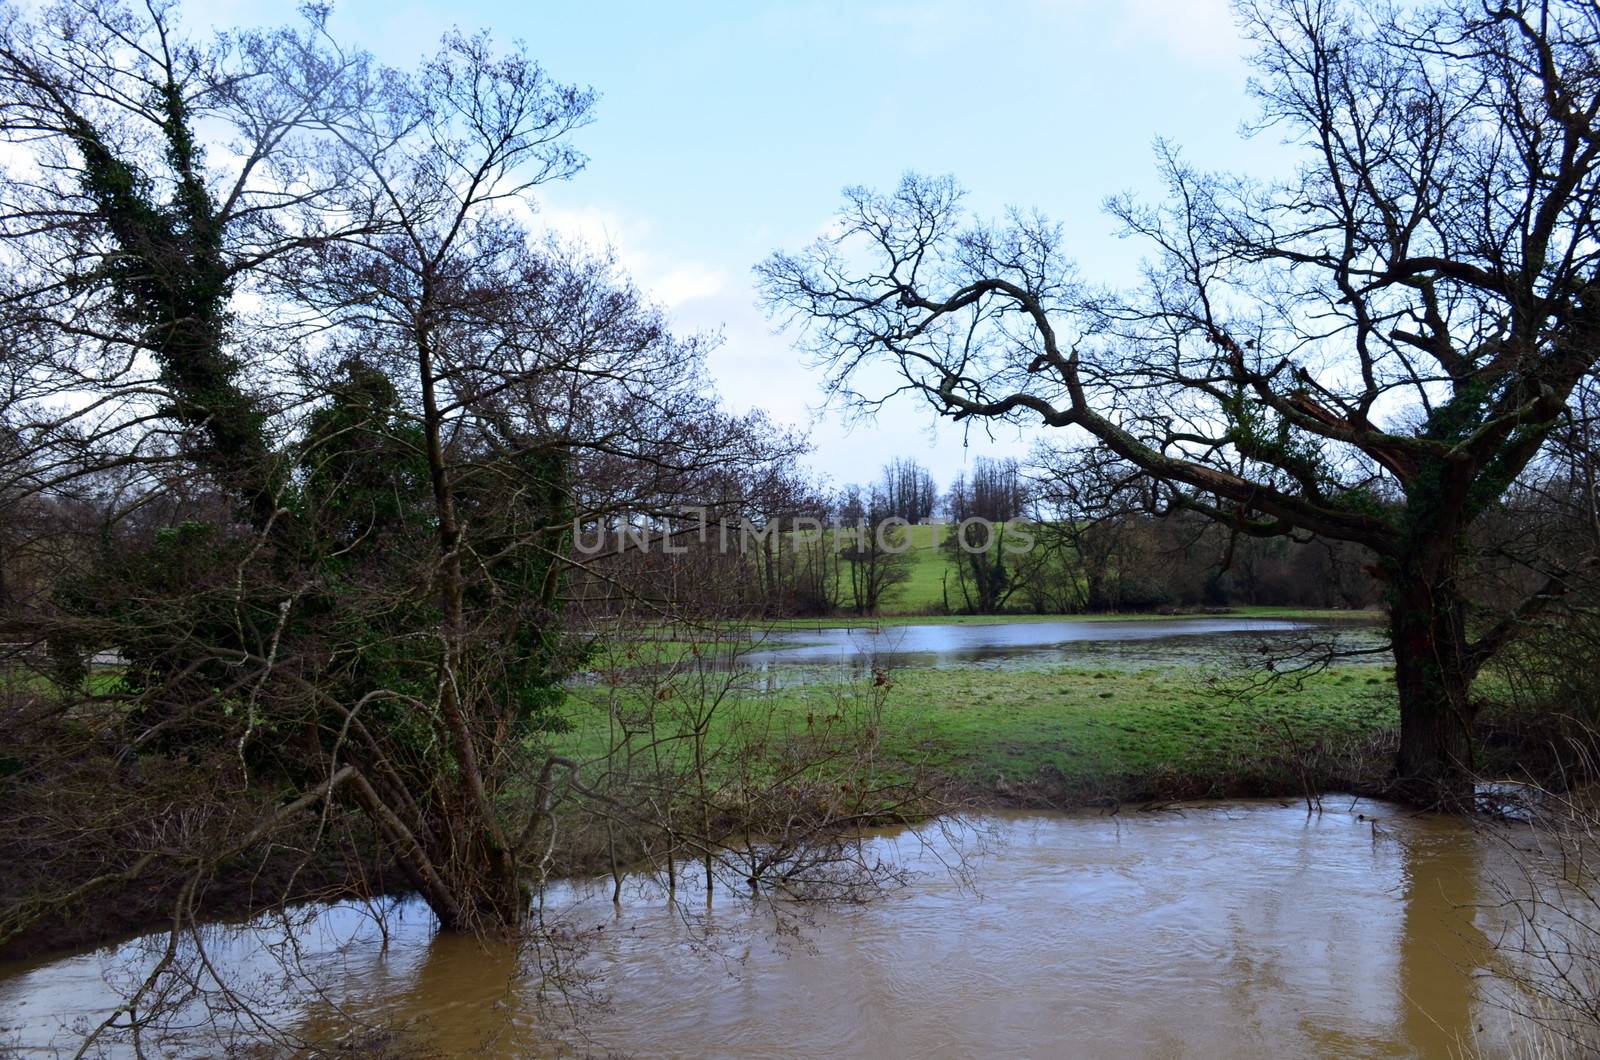 The River Ouse in Sussex, England bursts its banks due to heavy rainfall the UK experienced in early 2014 causing severe flooding.